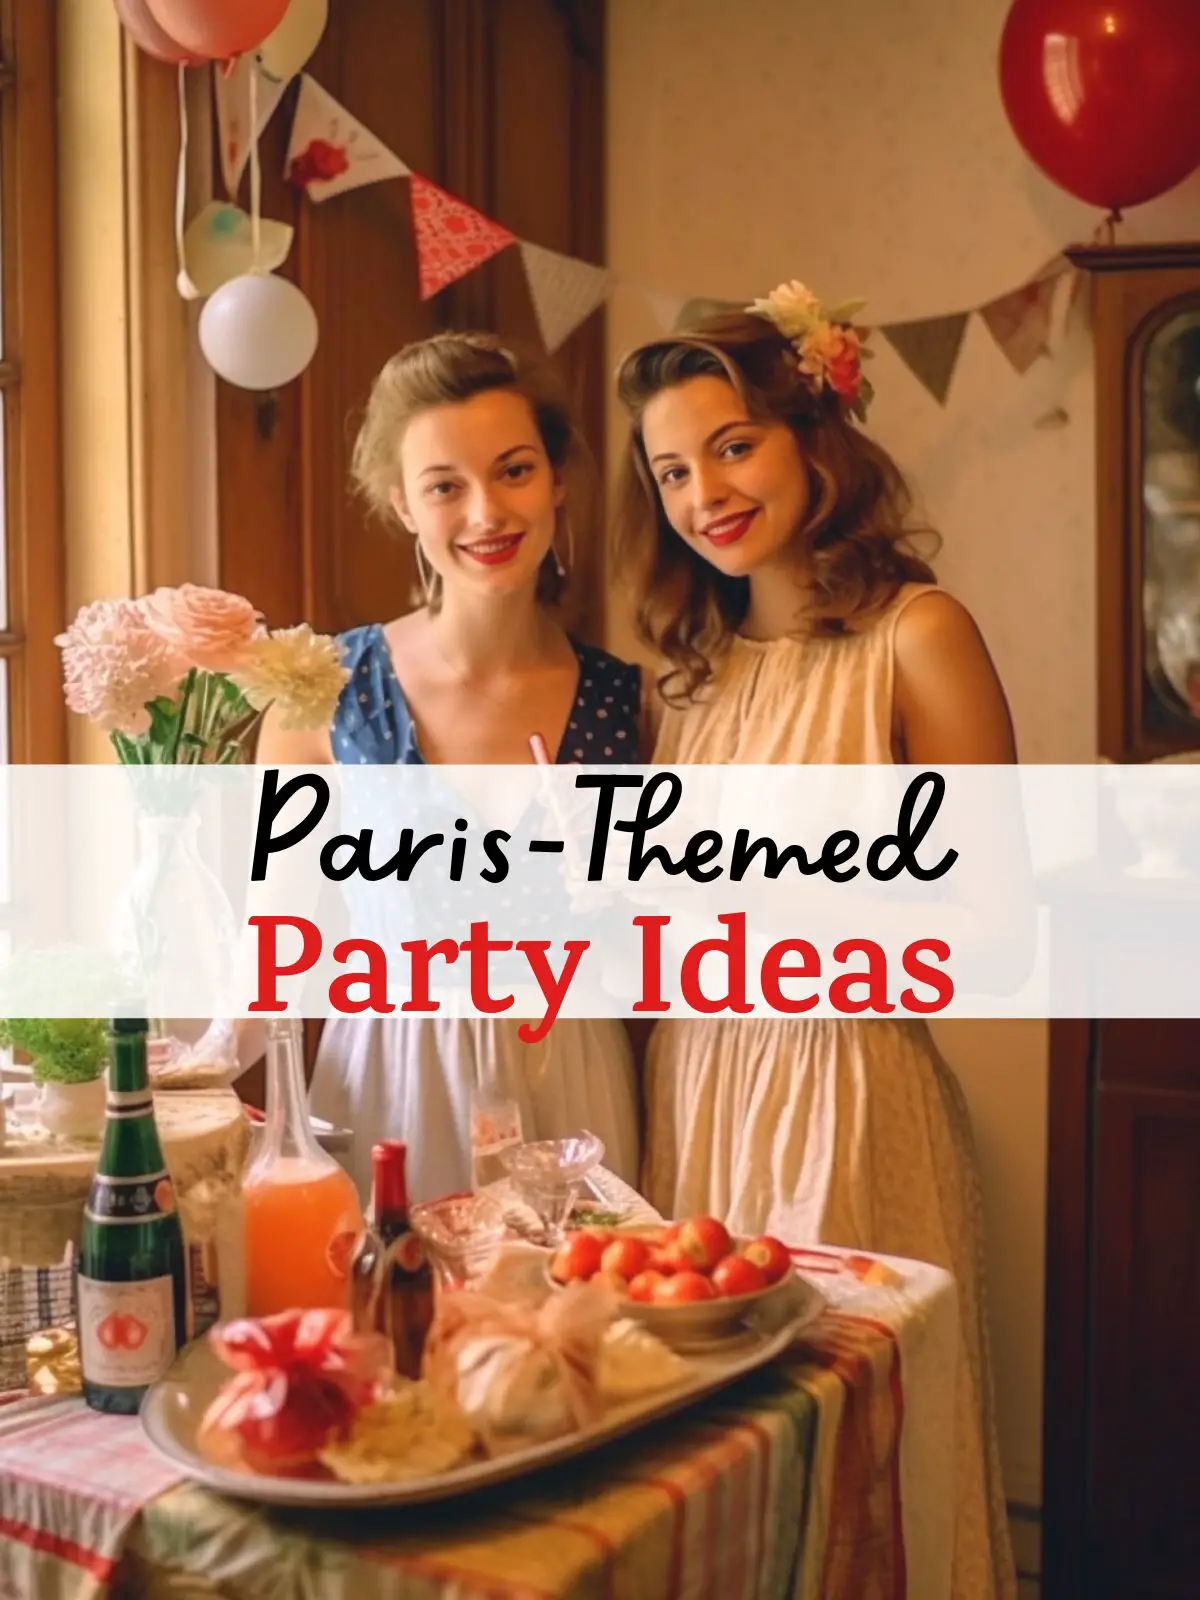 Two women at a French themed party with the text "paris-themed party ideas."